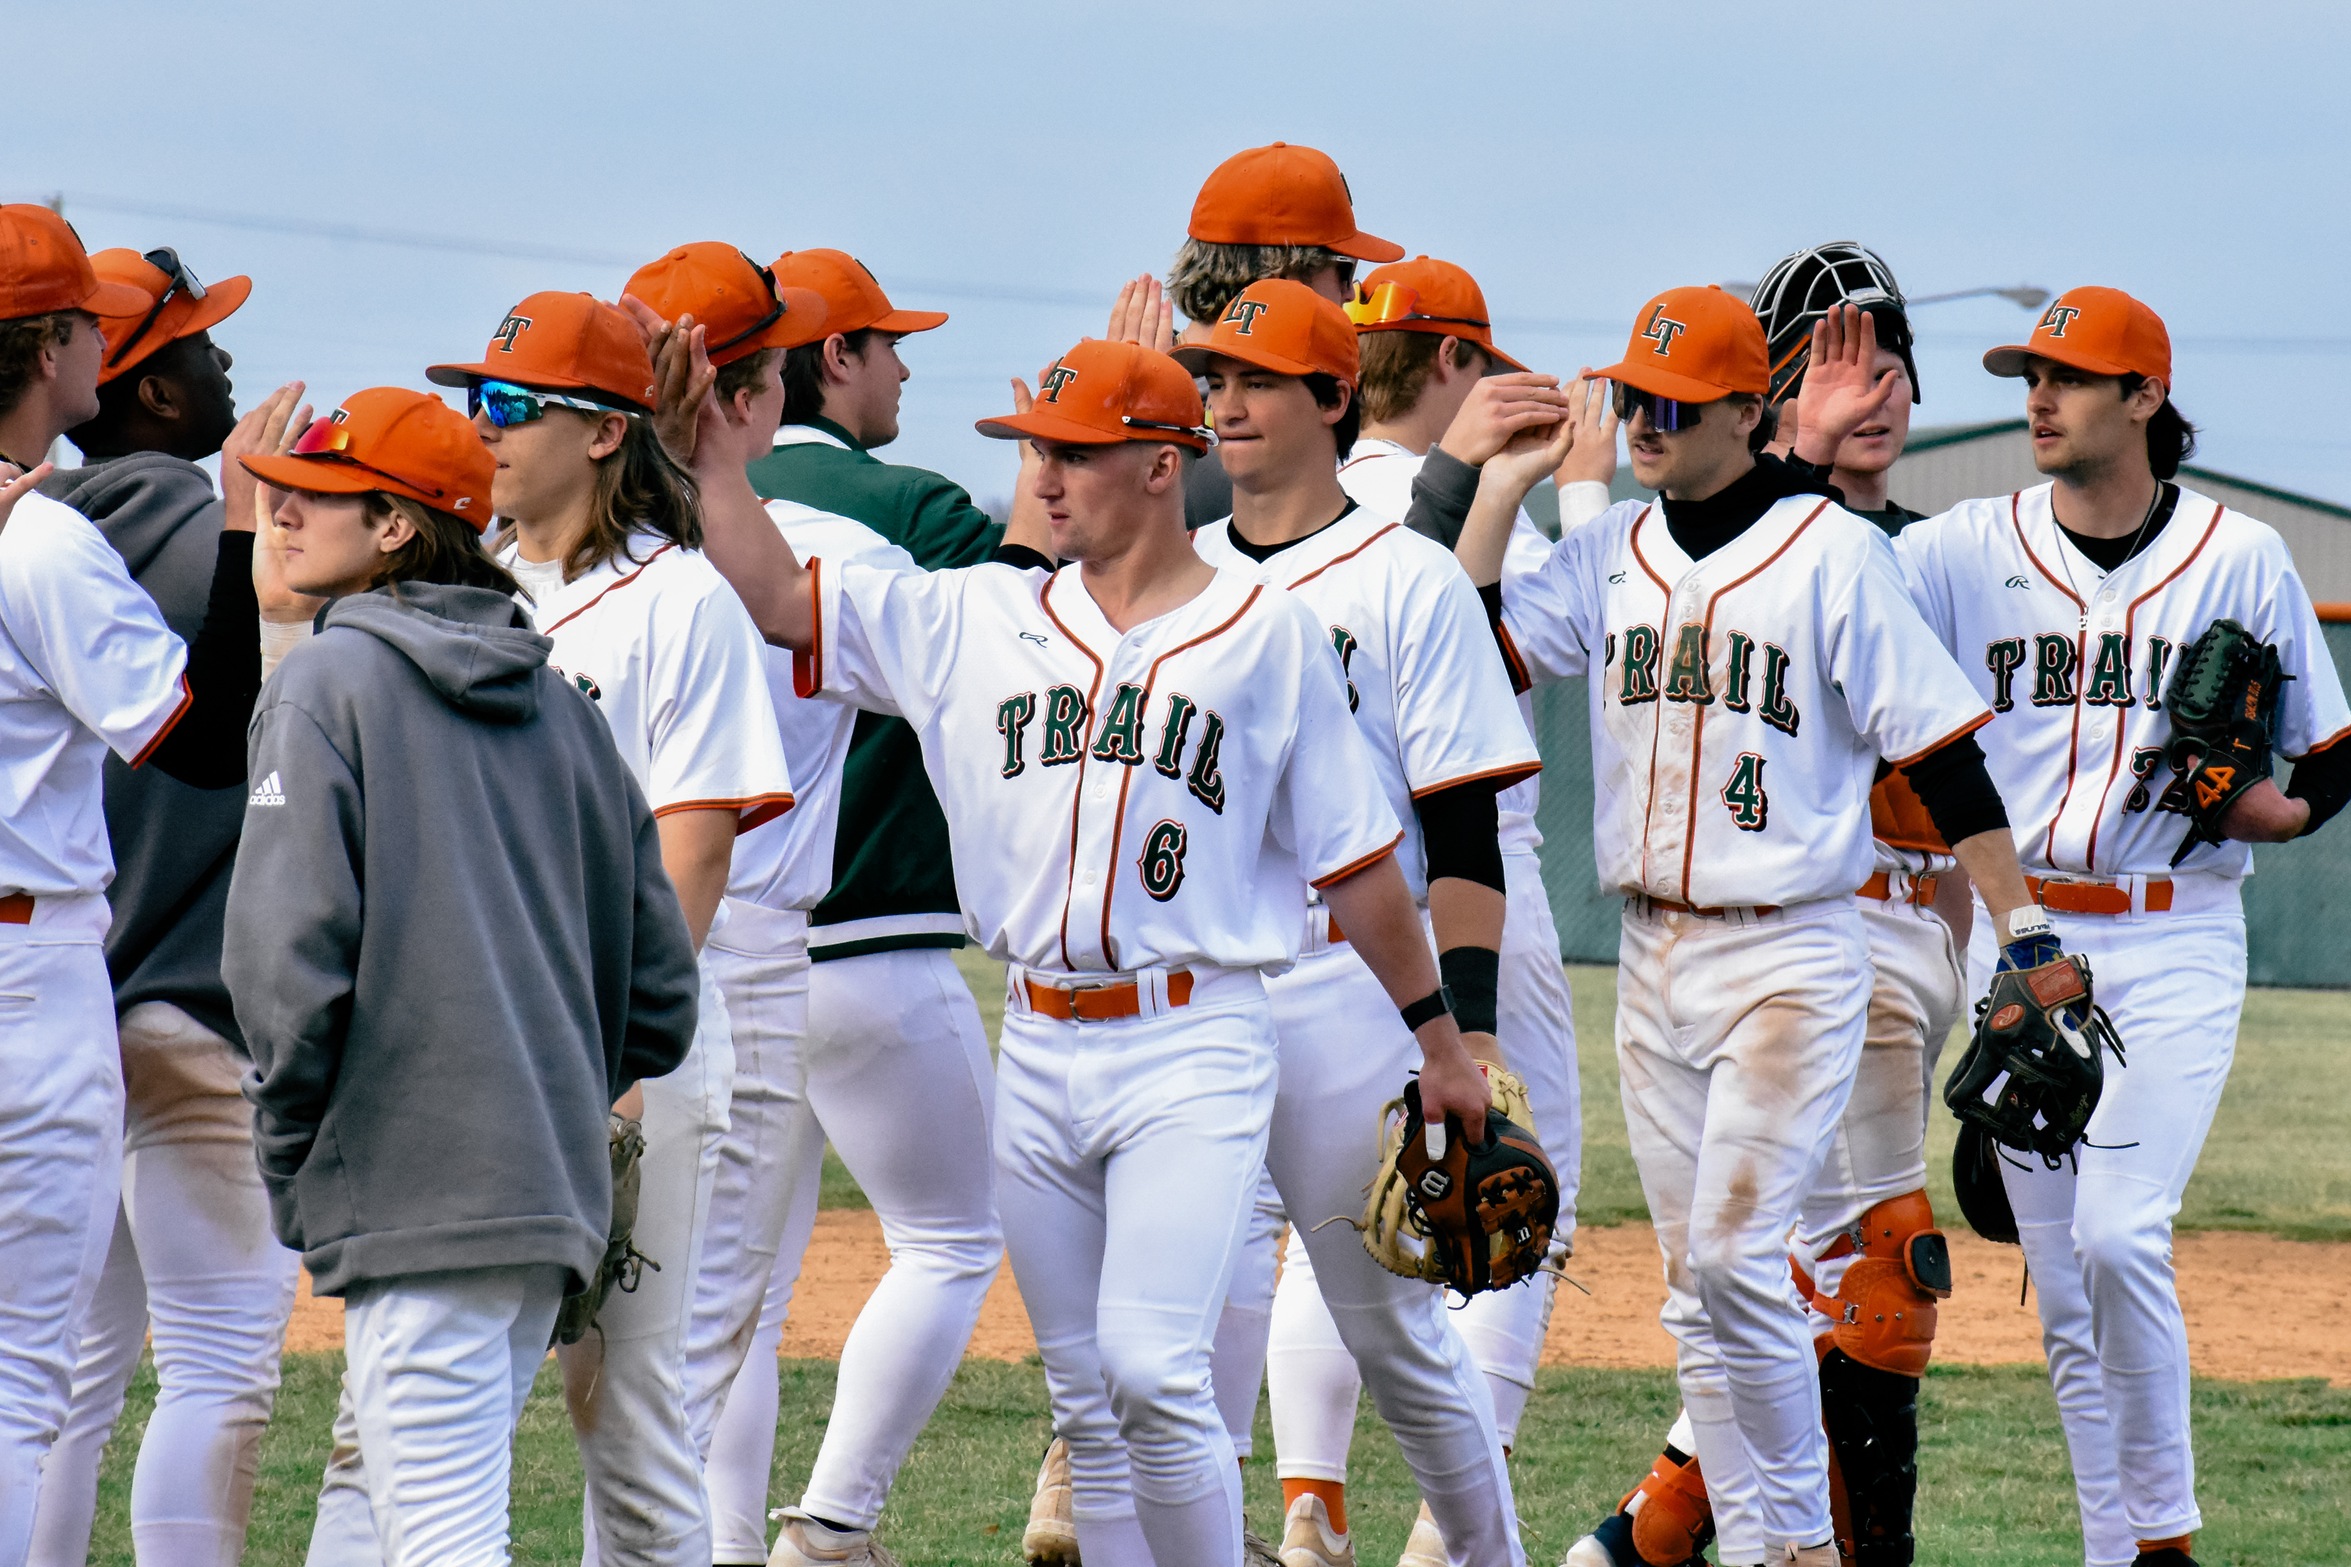 Lincoln Trail Baseball Secures Thrilling Victory in Home Opener